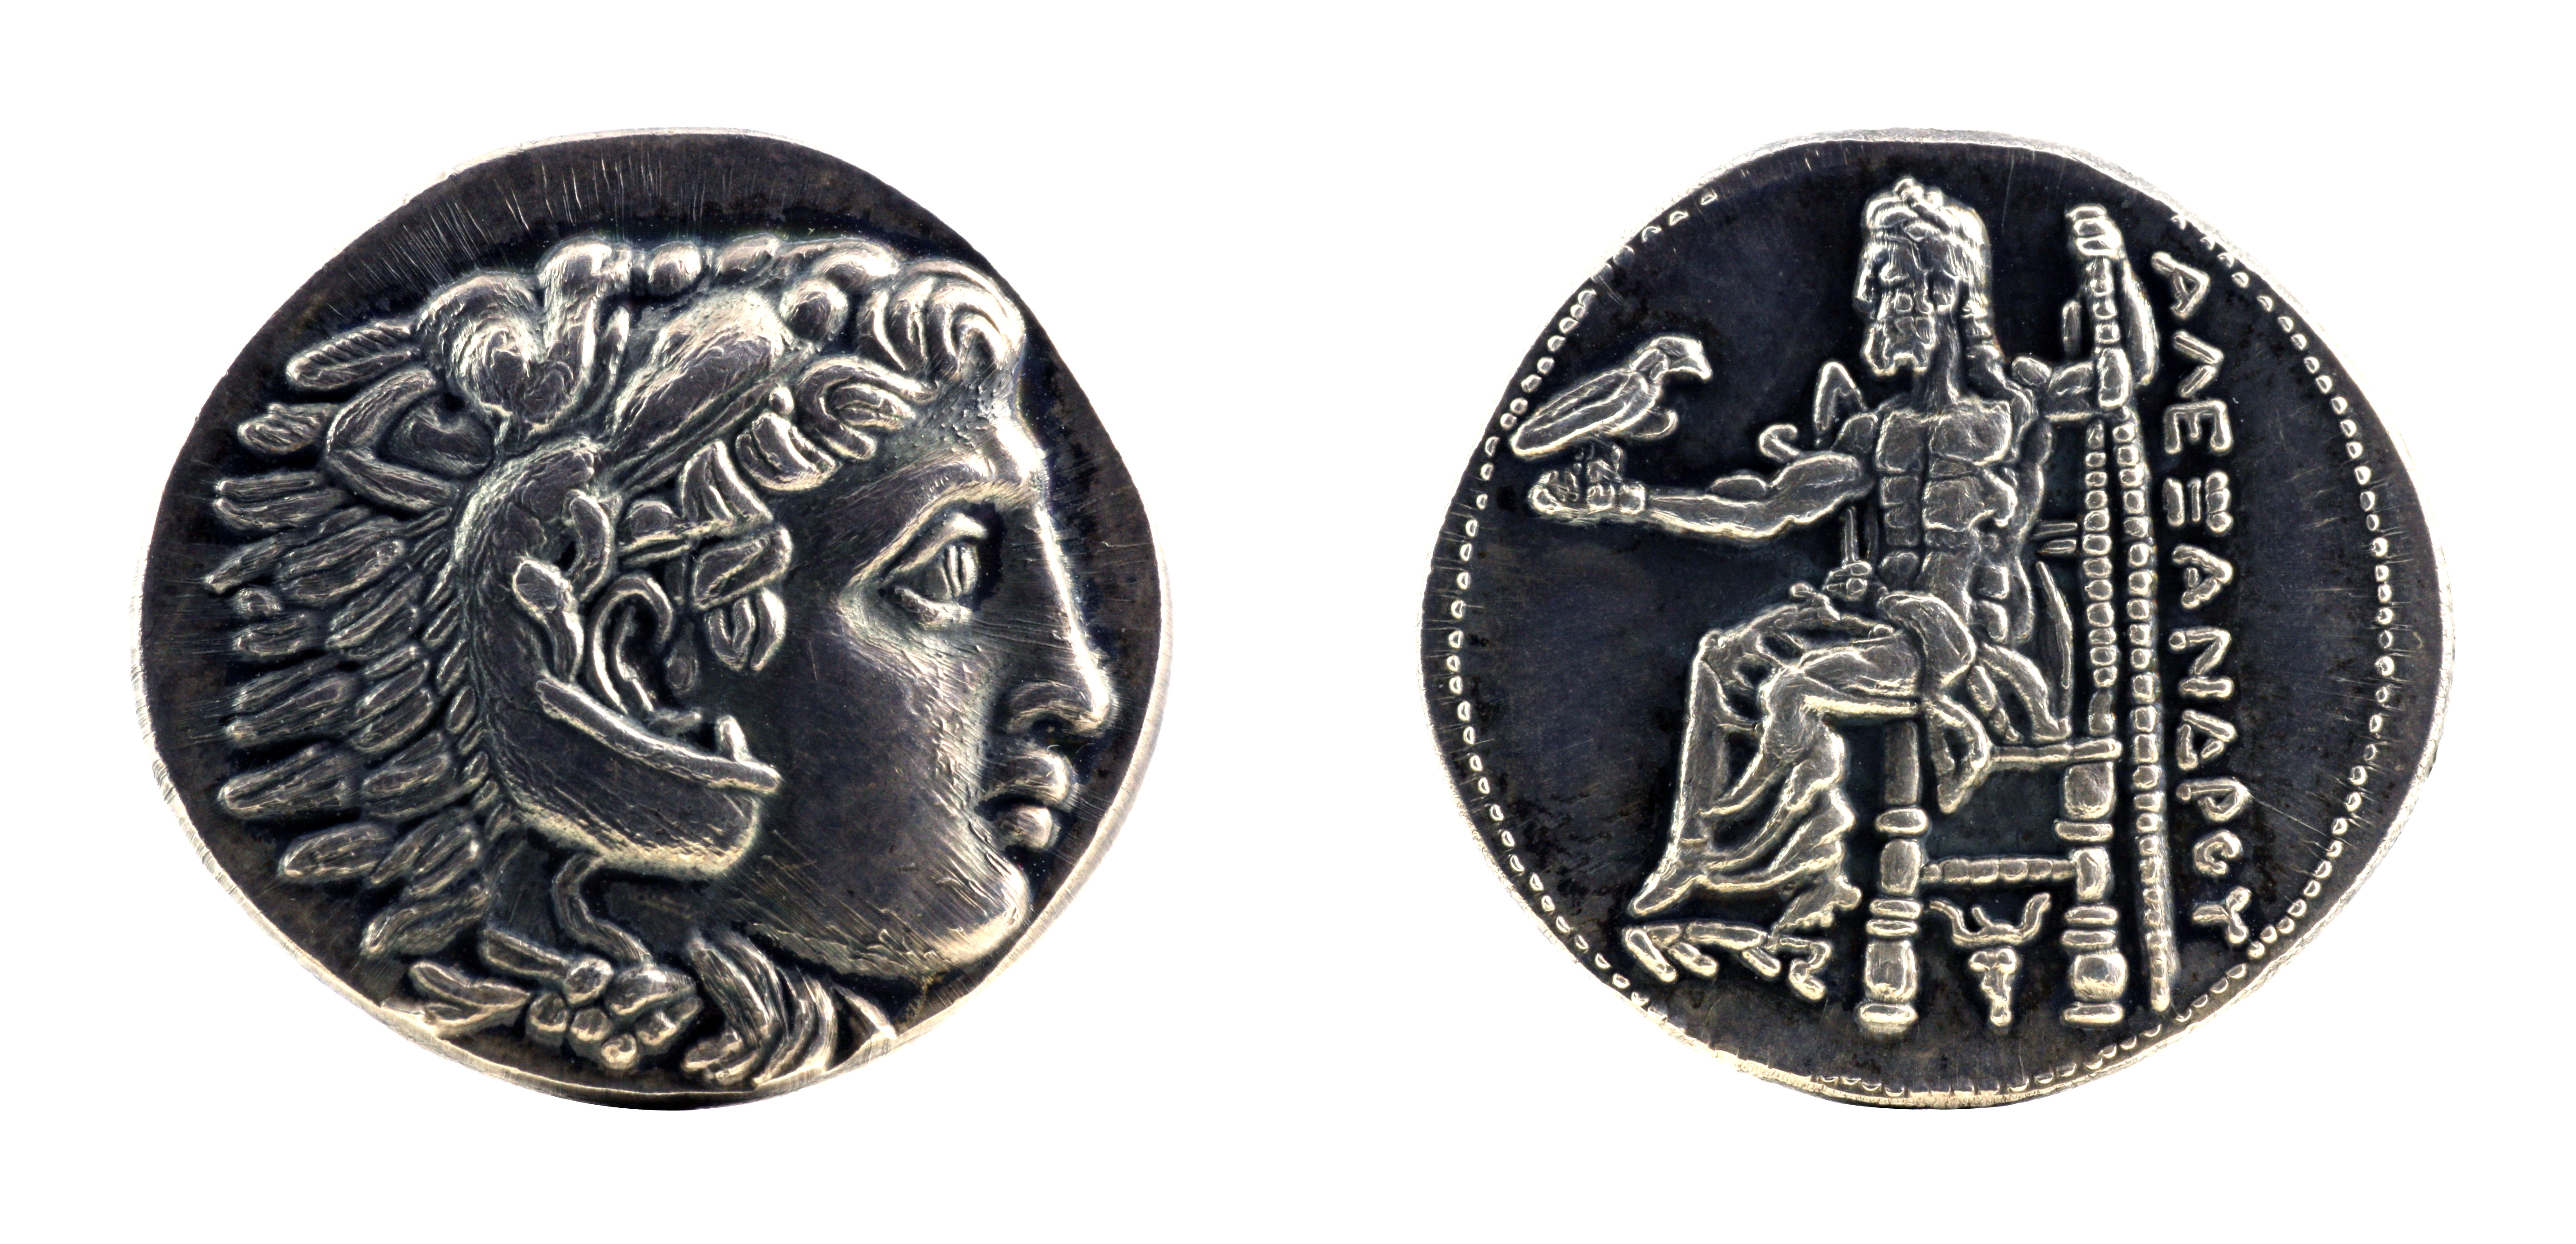 Greek silver tetradrachm from Alexander the Great showing Hercules wearing lion skin at obverse and Zeus at reverse, dated 323-315 BC. Image courtesy Adobe Stock.